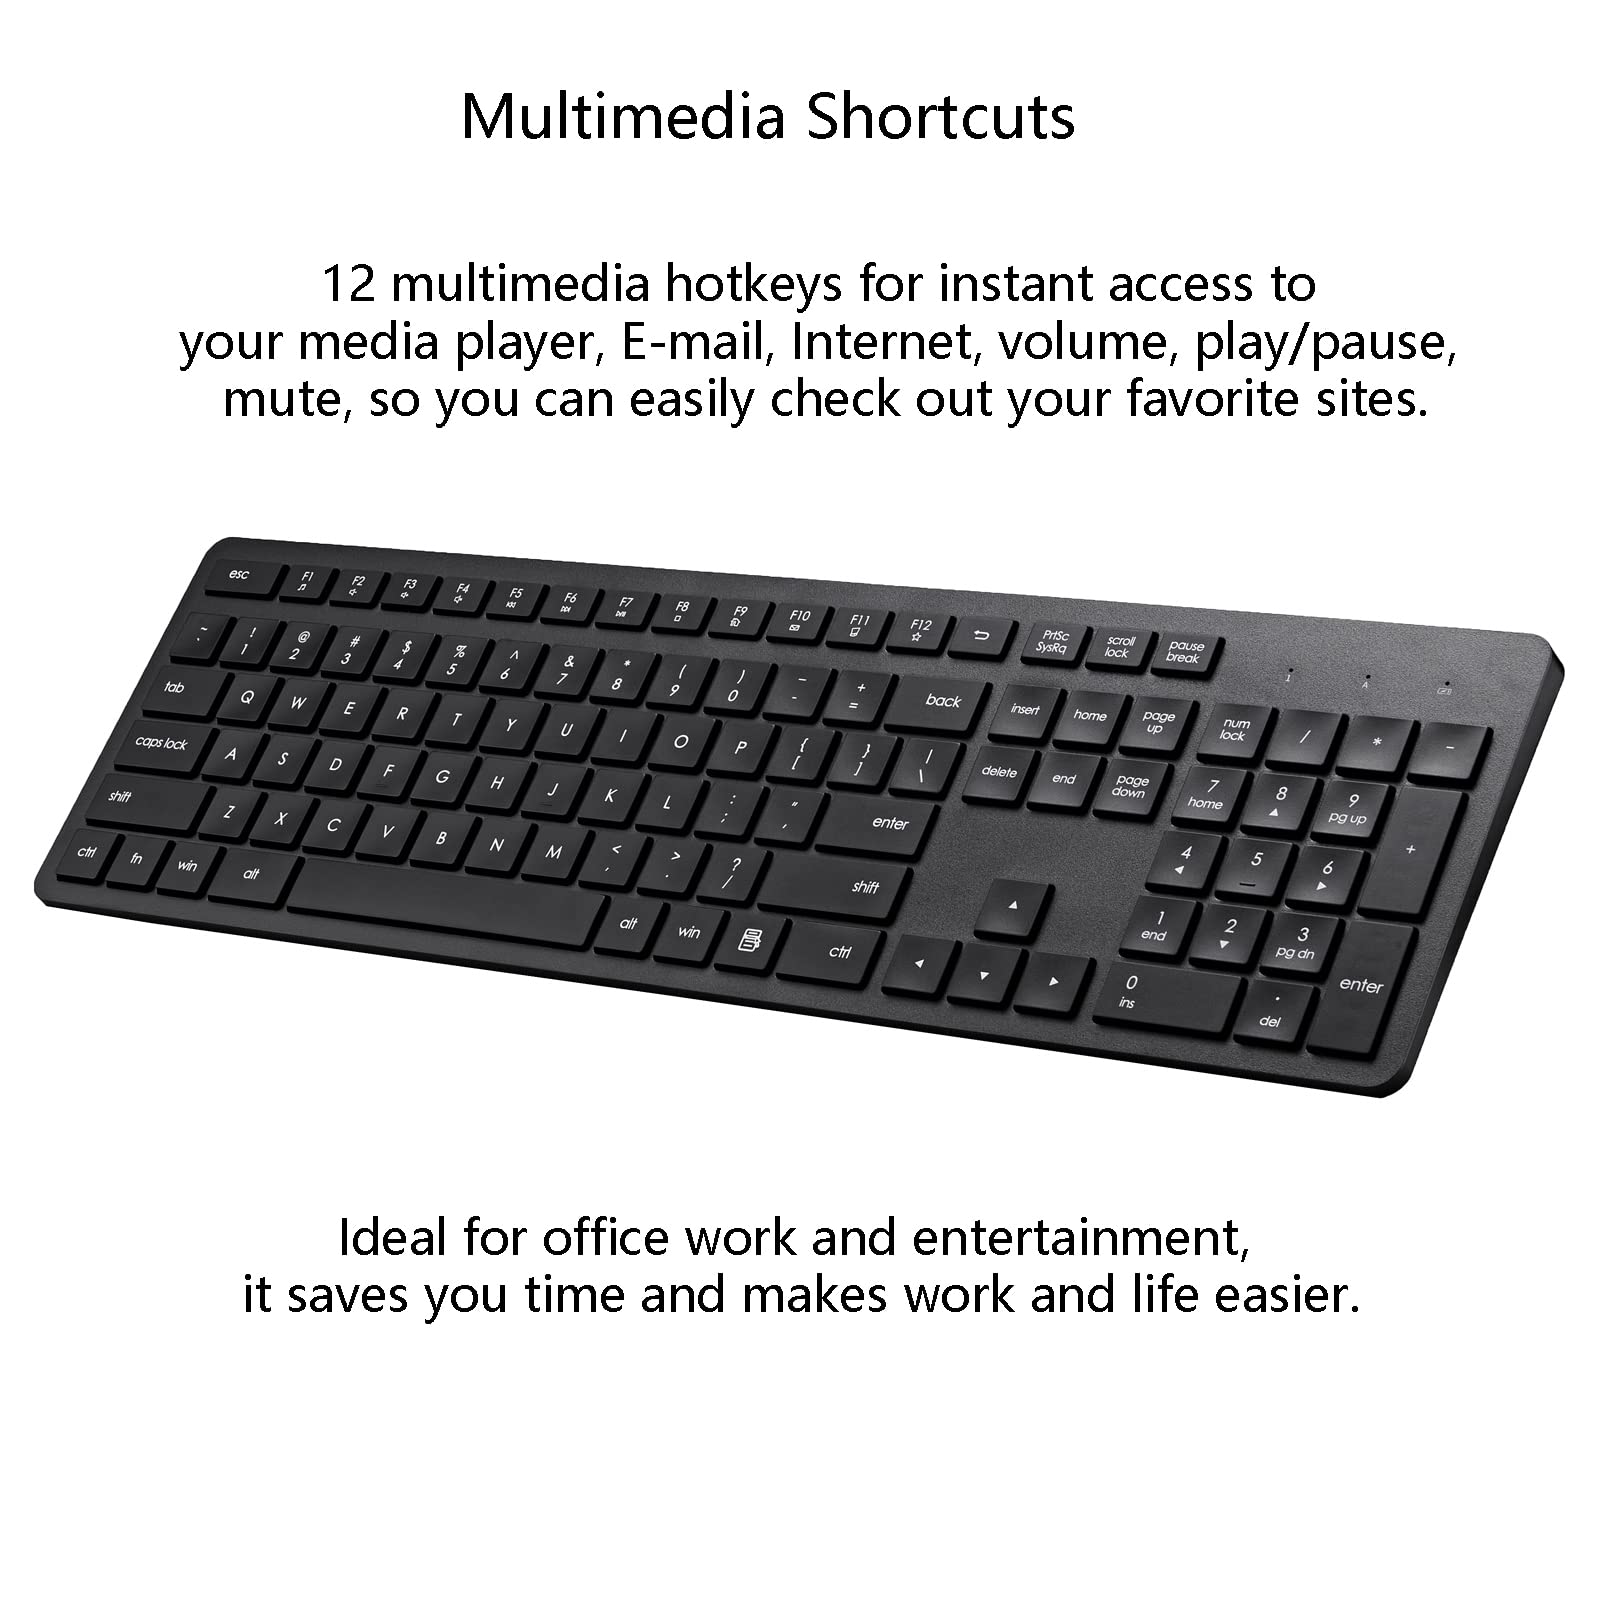 Wireless Keyboard and Mouse Combo, 2.4G Silent Cordless Keyboard Mouse Combo for Windows Chrome Laptop Computer PC Desktop, 106 Keys Full Size with Number Pad, 1600 DPI Optical Mouse (Black)